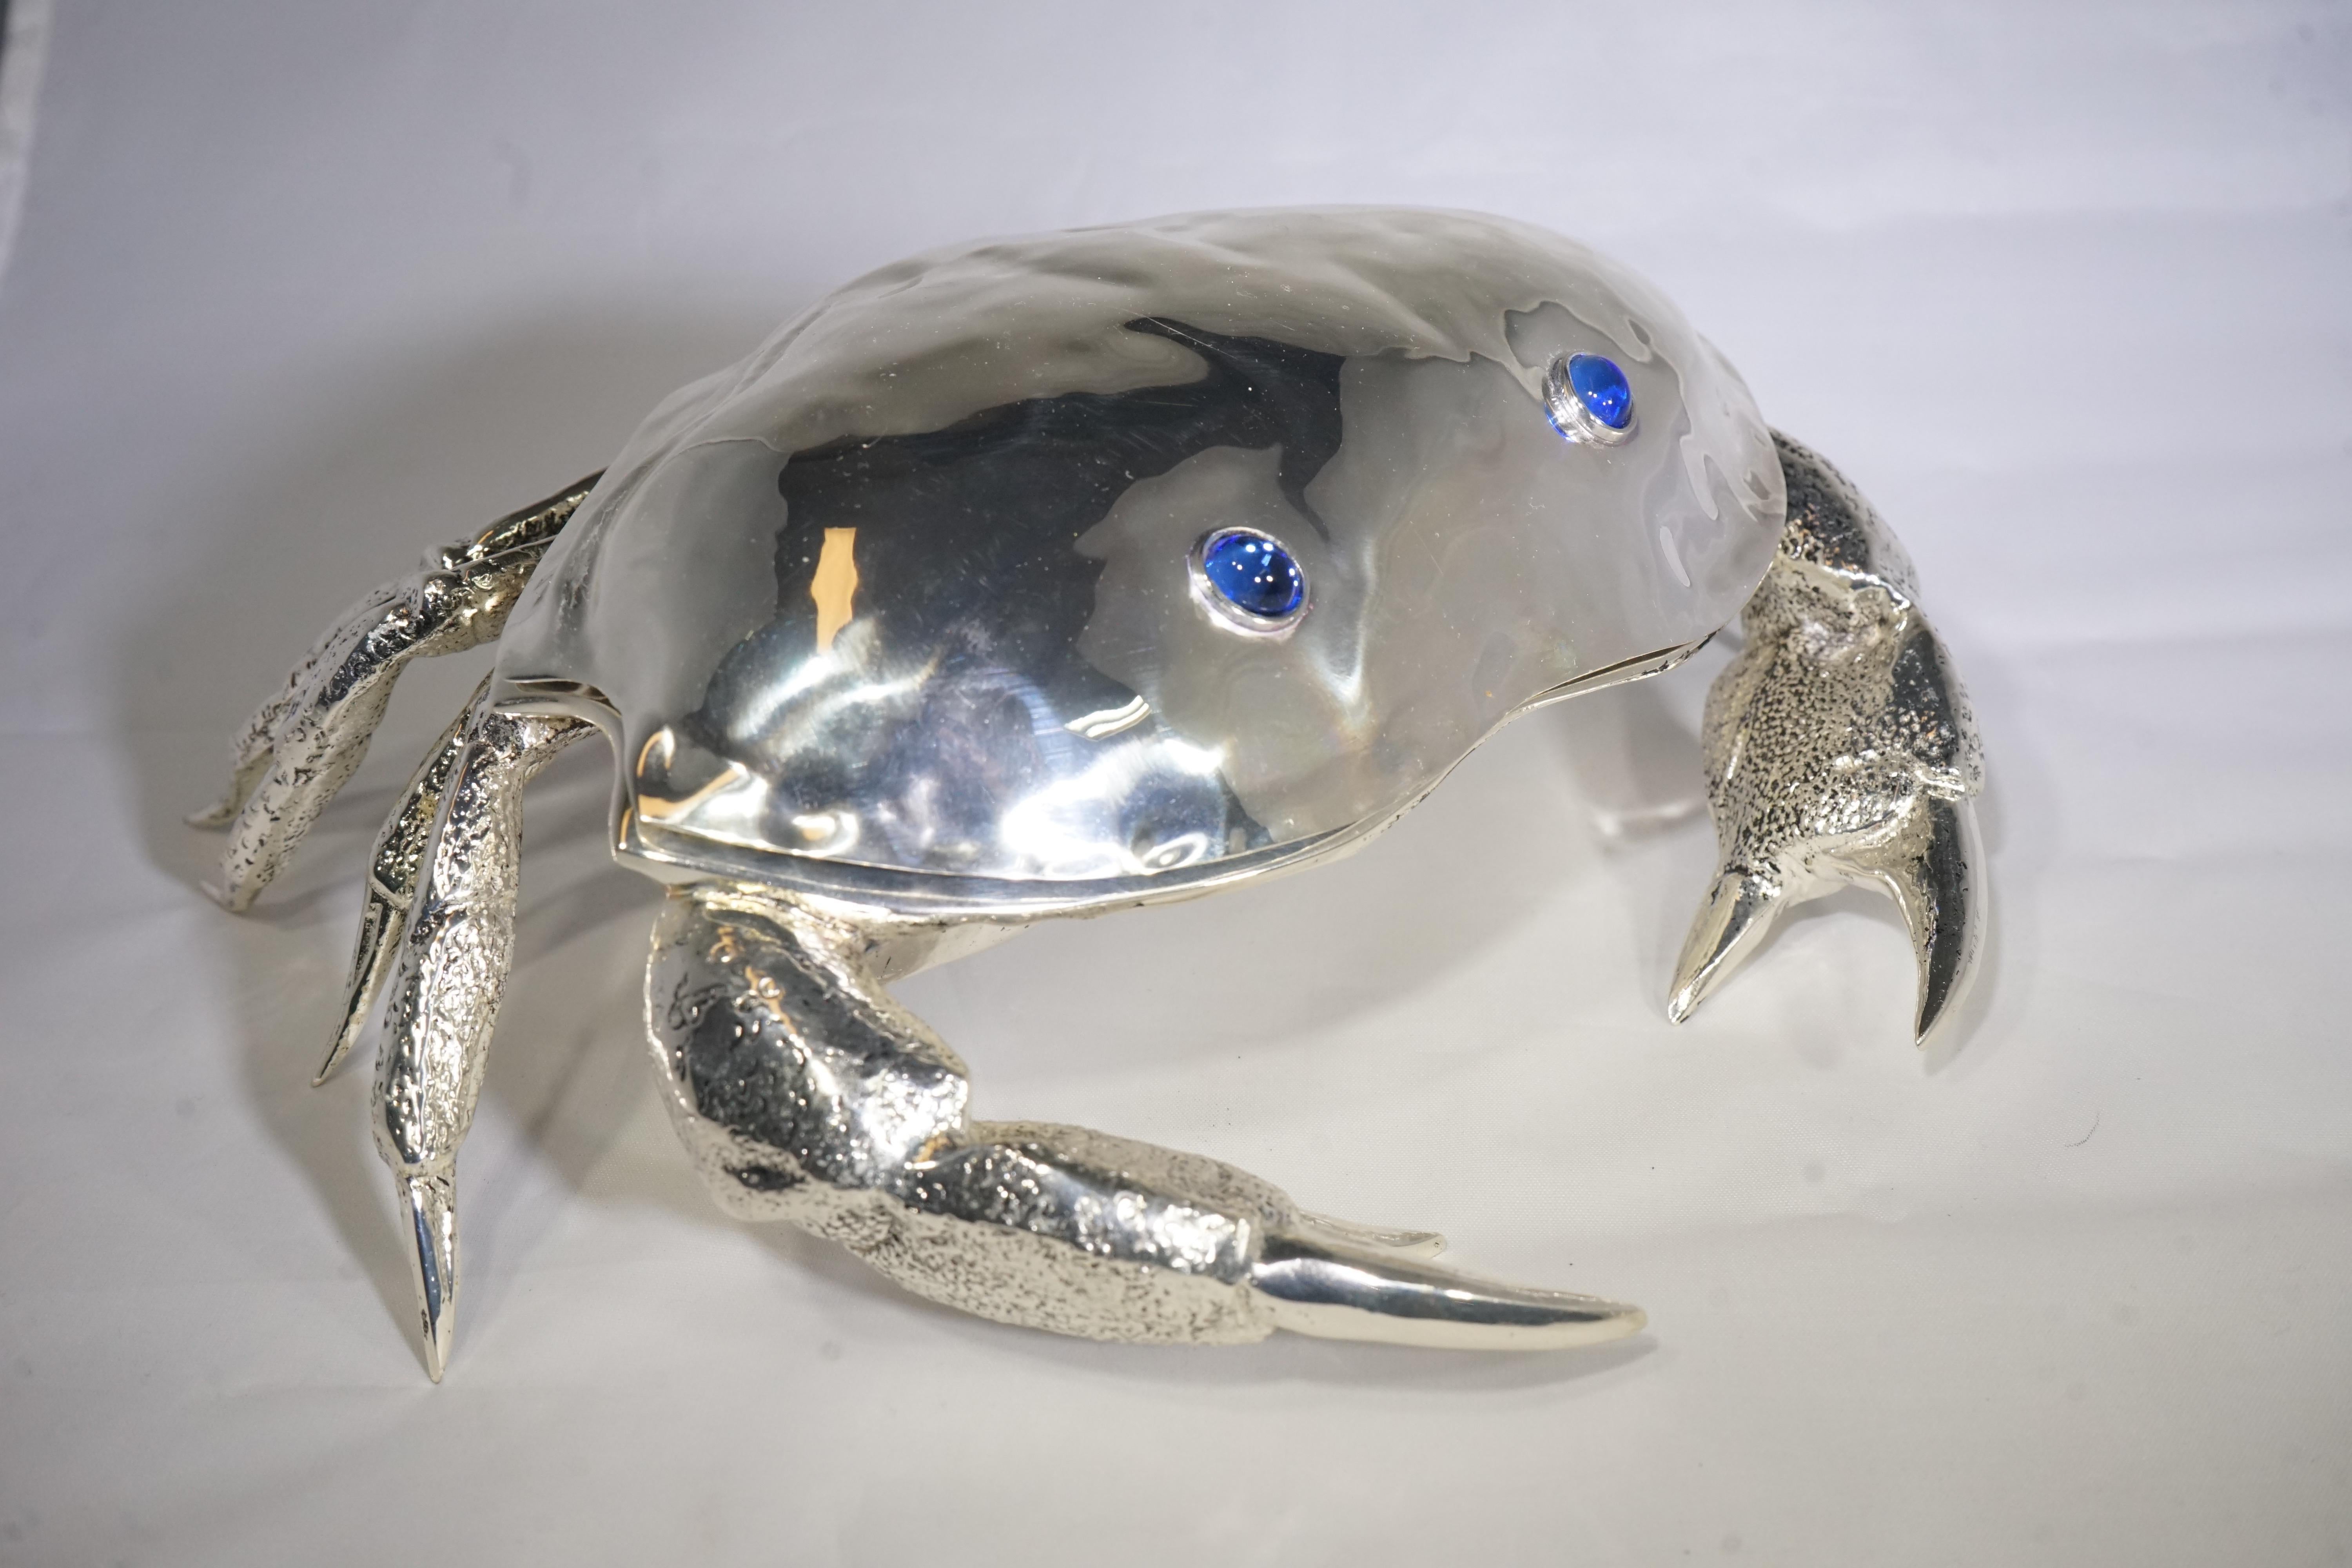 1970s Italian Franco Lapini inspired silver plated crab caviar server with cobalt blue glass liner.